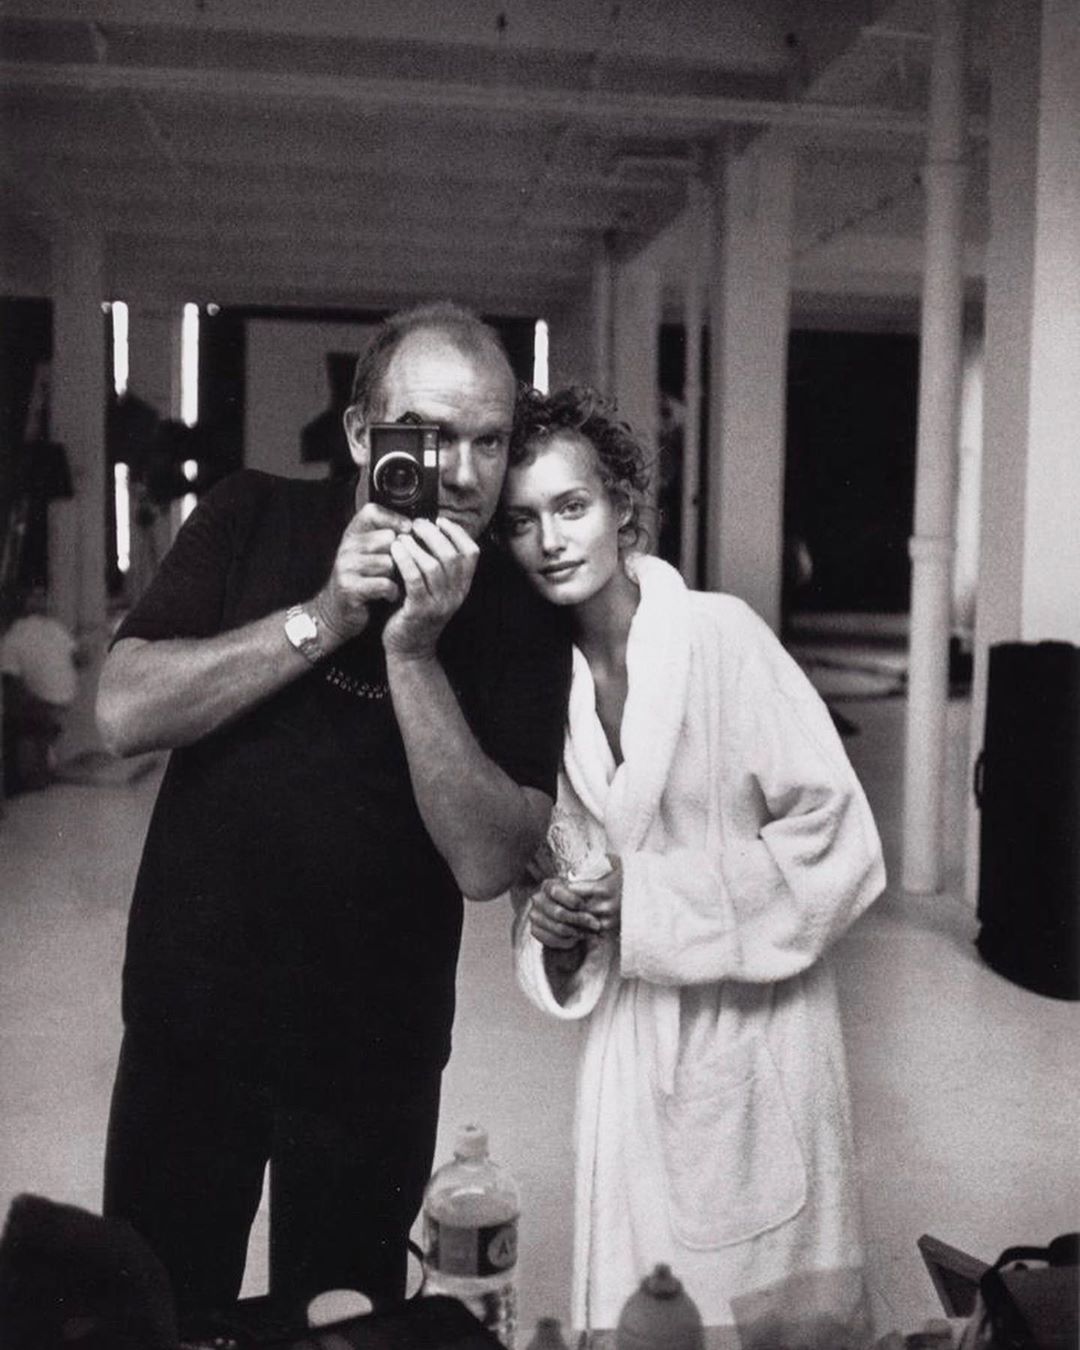 Amber Valletta - I miss you so much Peter. Always in my heart and in my thoughts. @therealpeterlindbergh ❤️